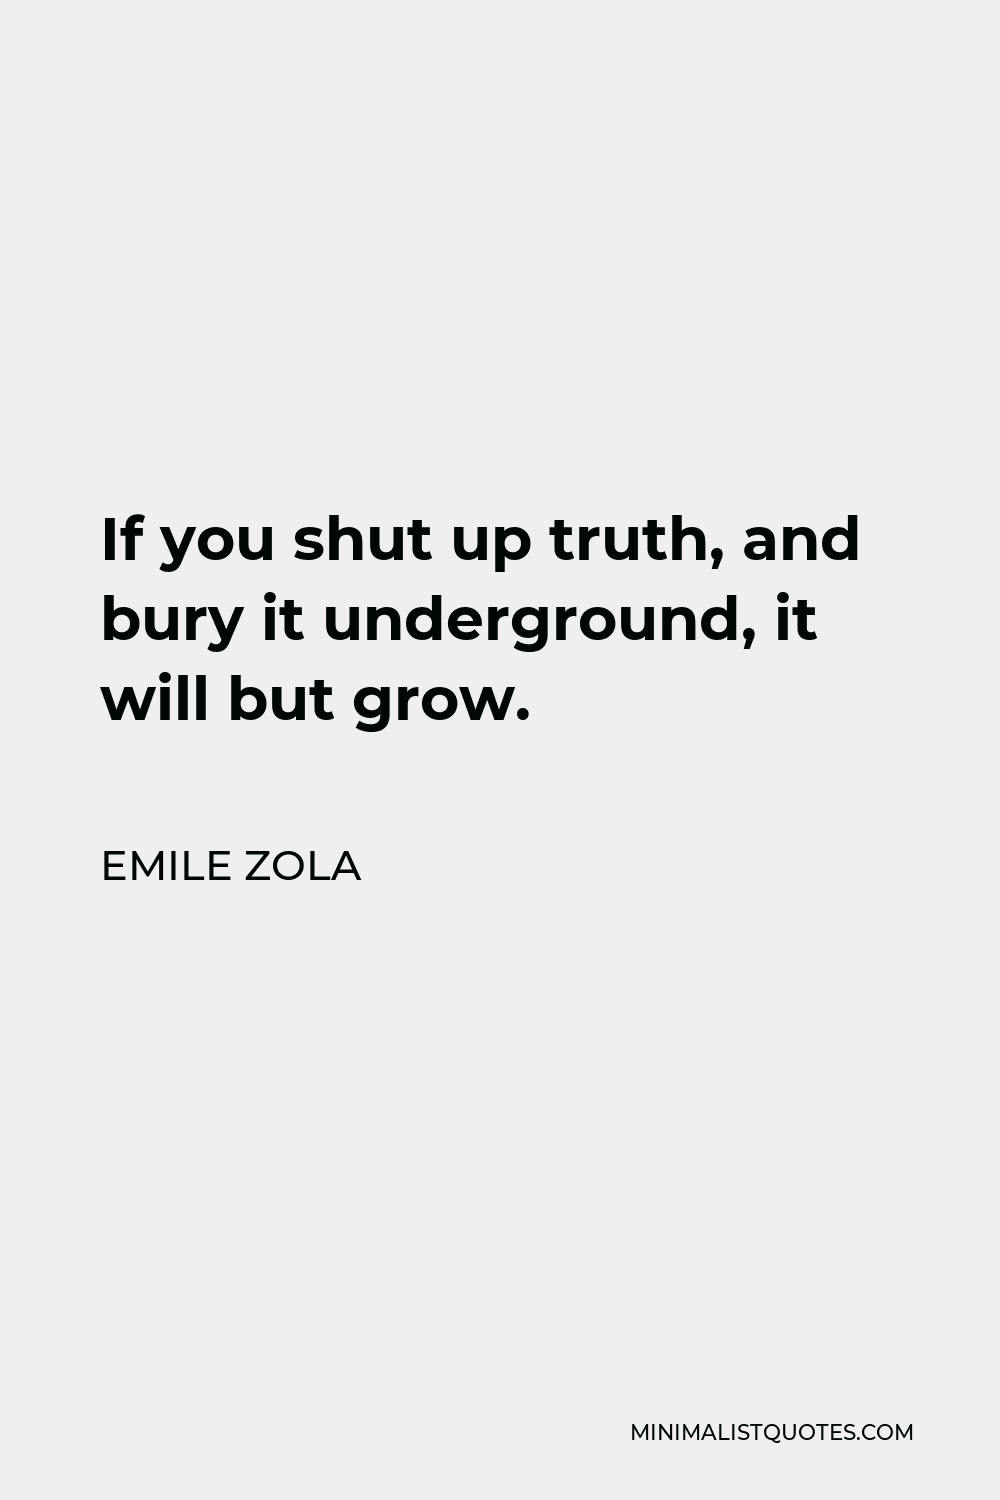 Emile Zola Quote - If you shut up truth, and bury it underground, it will but grow.